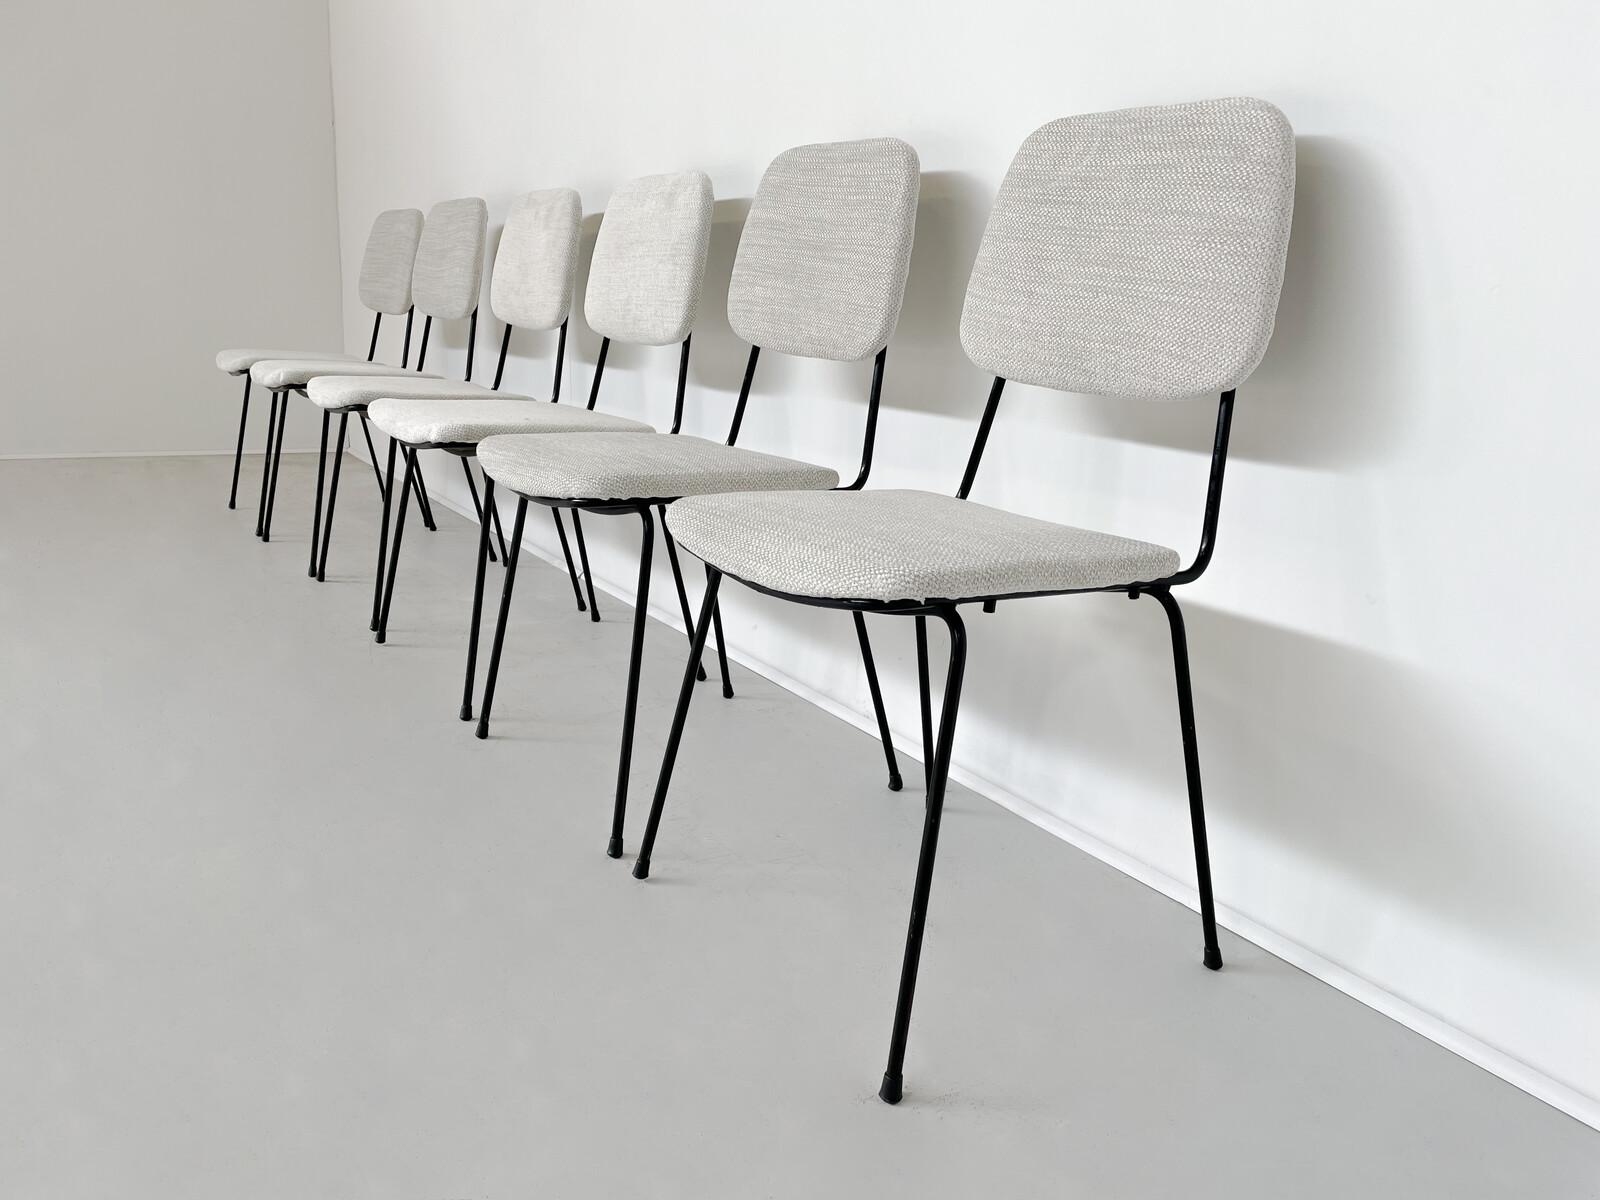 Mid-20th Century Mid-Century Modern Set of 6 Chairs, Italy, 1960s - New Upholstery For Sale